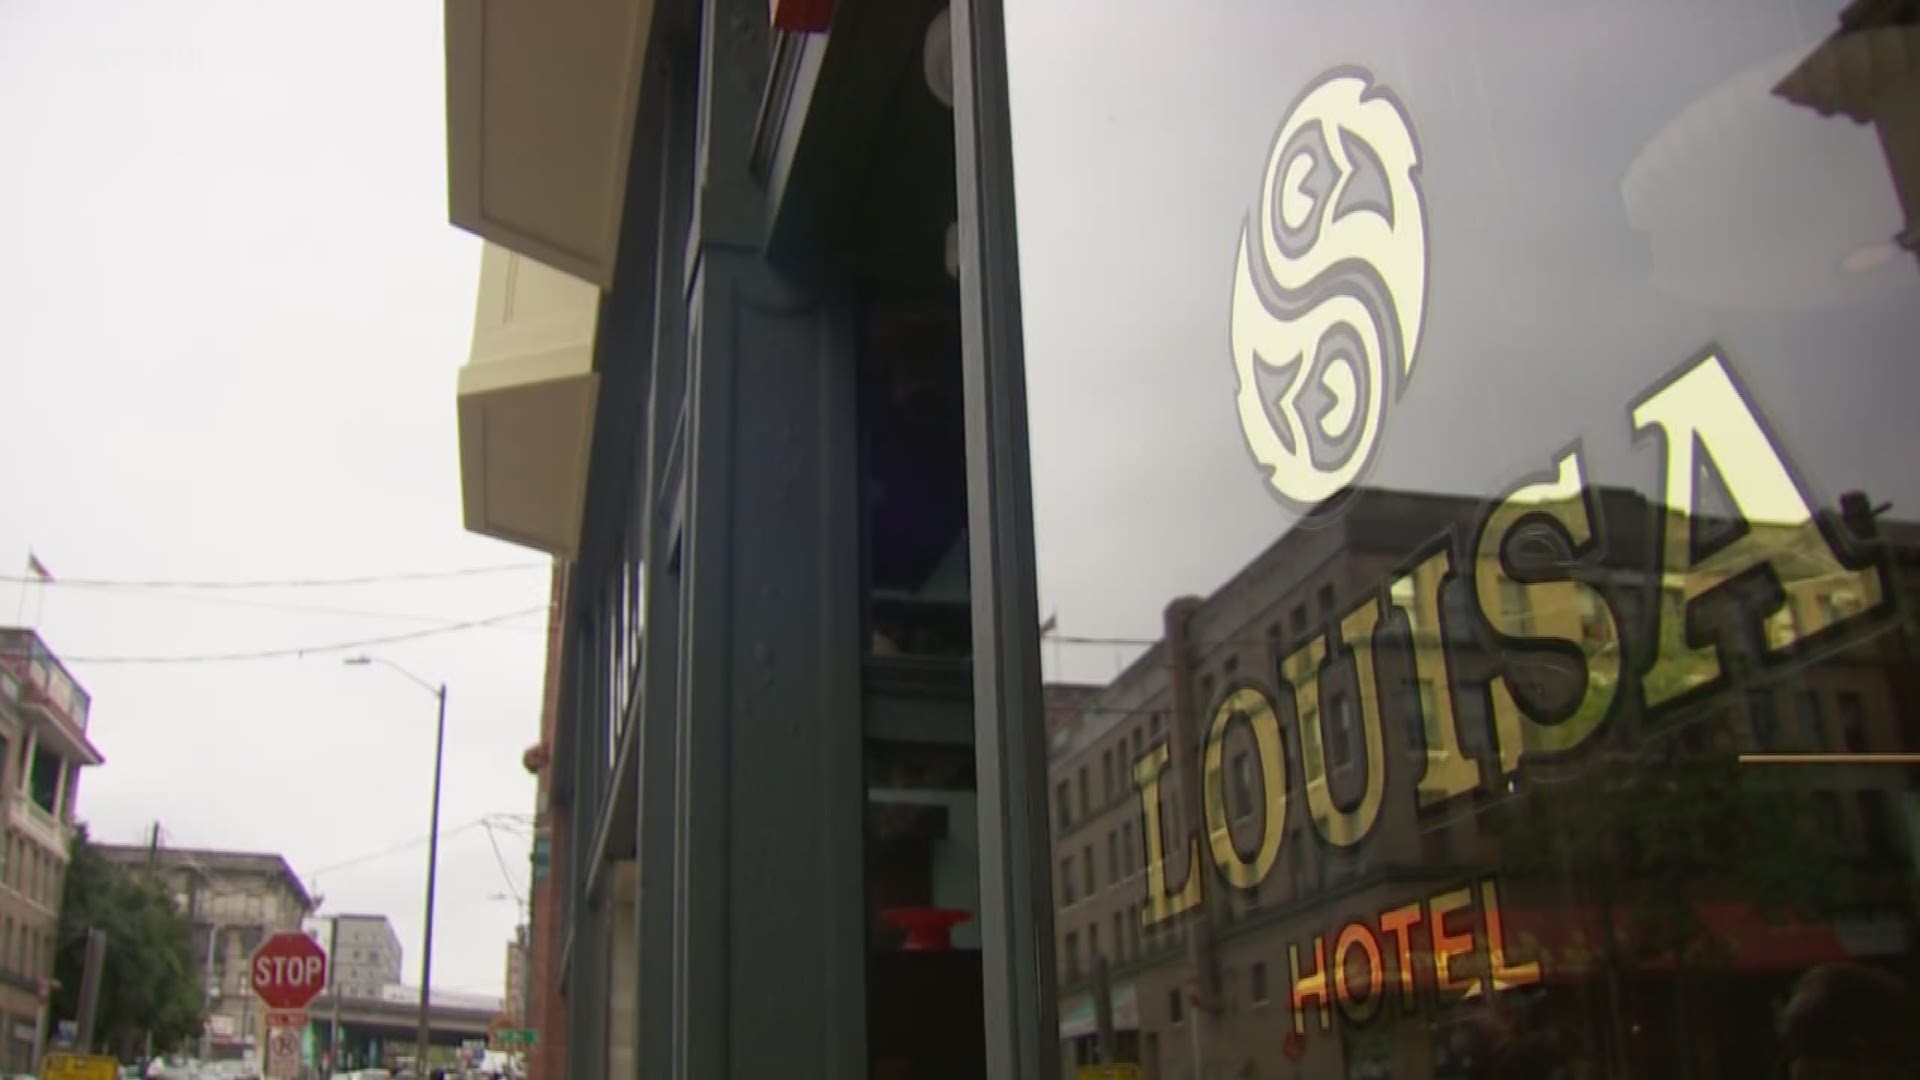 The property at 7th and King St. was damaged in a fire on Christmas Eve 2013, but after extensive renovations, it's now affordable apartments and storefronts. KING 5's Ted Land reports.